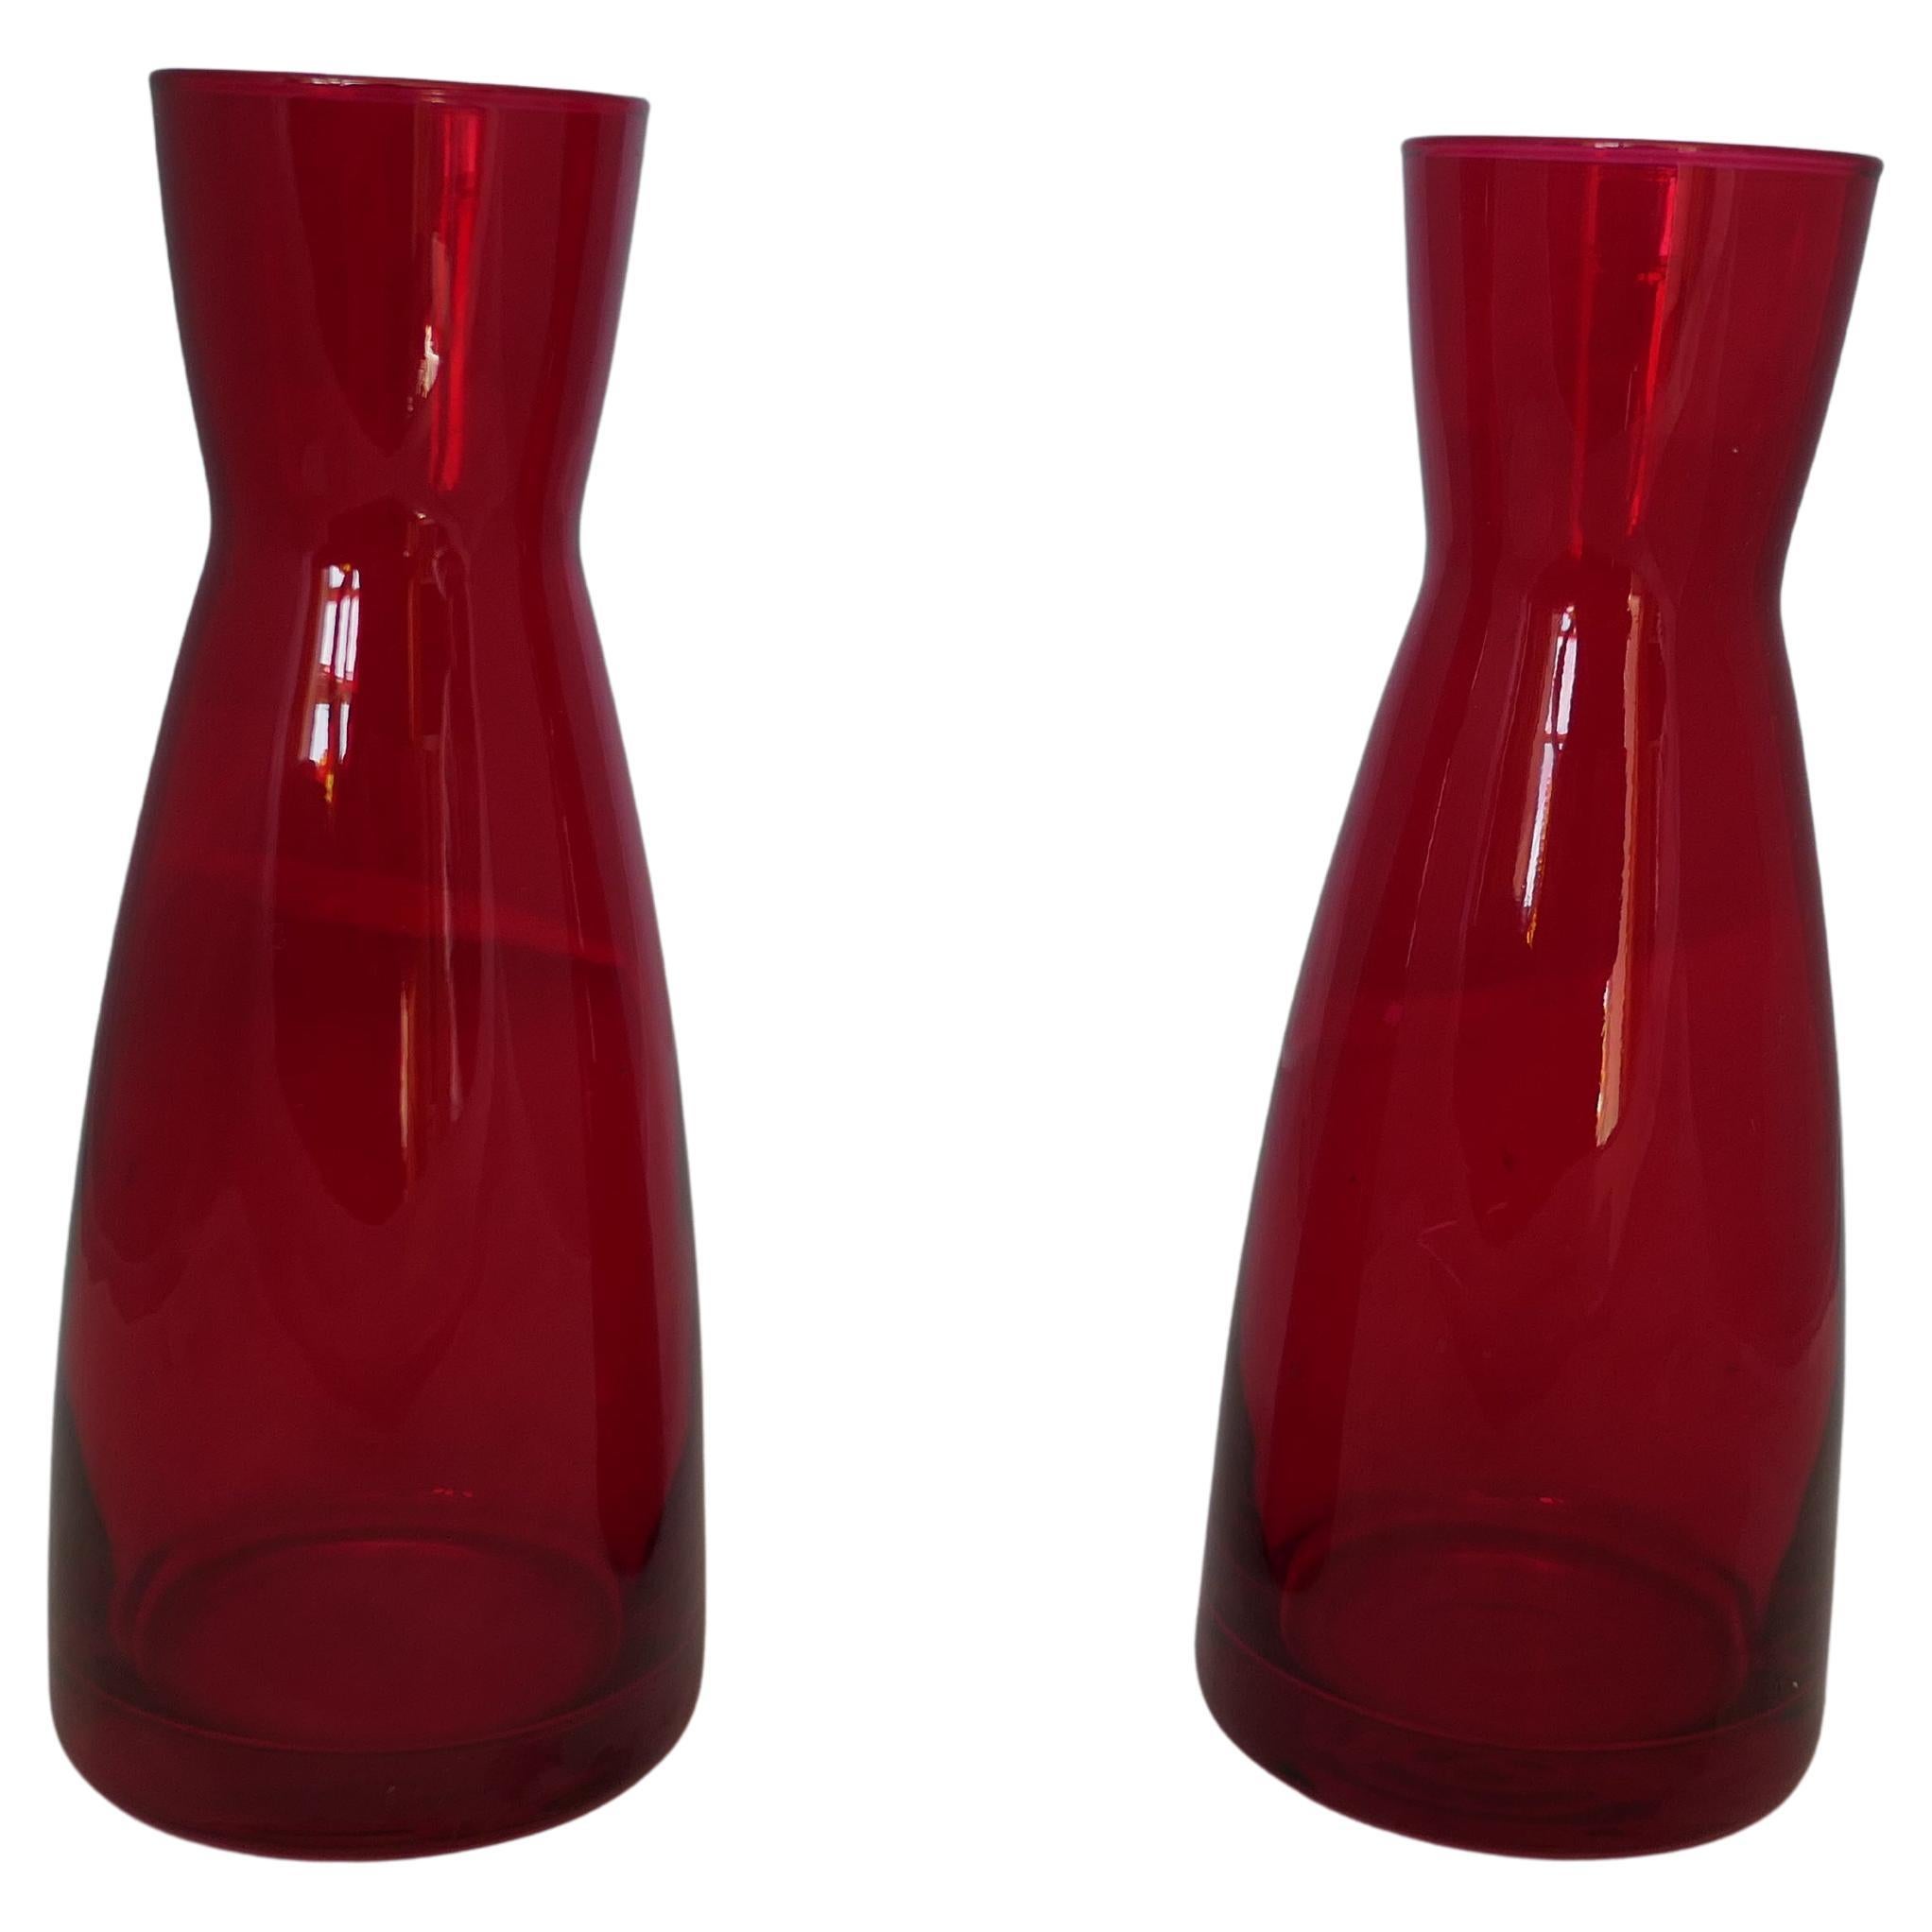 A Pair of Ypsilon Red Glass Carafes by Bormioli Rocco     For Sale